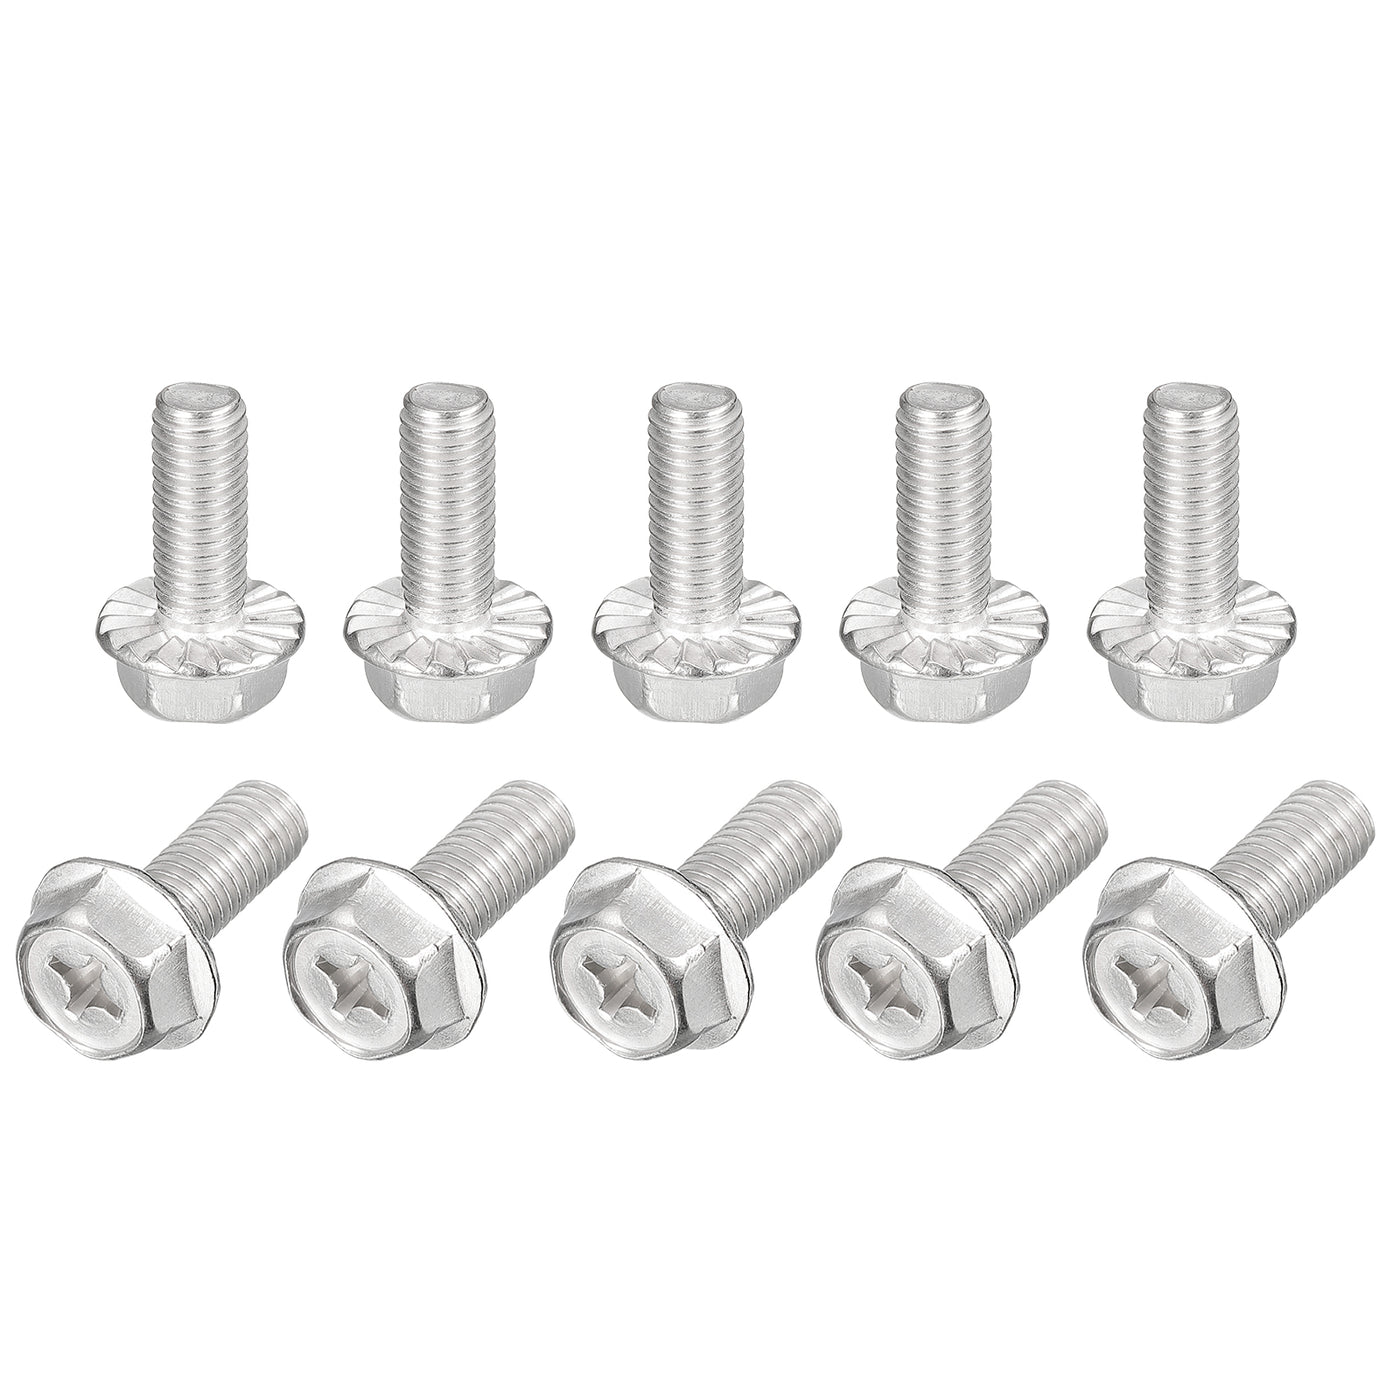 uxcell Uxcell M8x20mm Phillips Hex Head Flange Bolts, 10pcs 304 Stainless Steel Screws